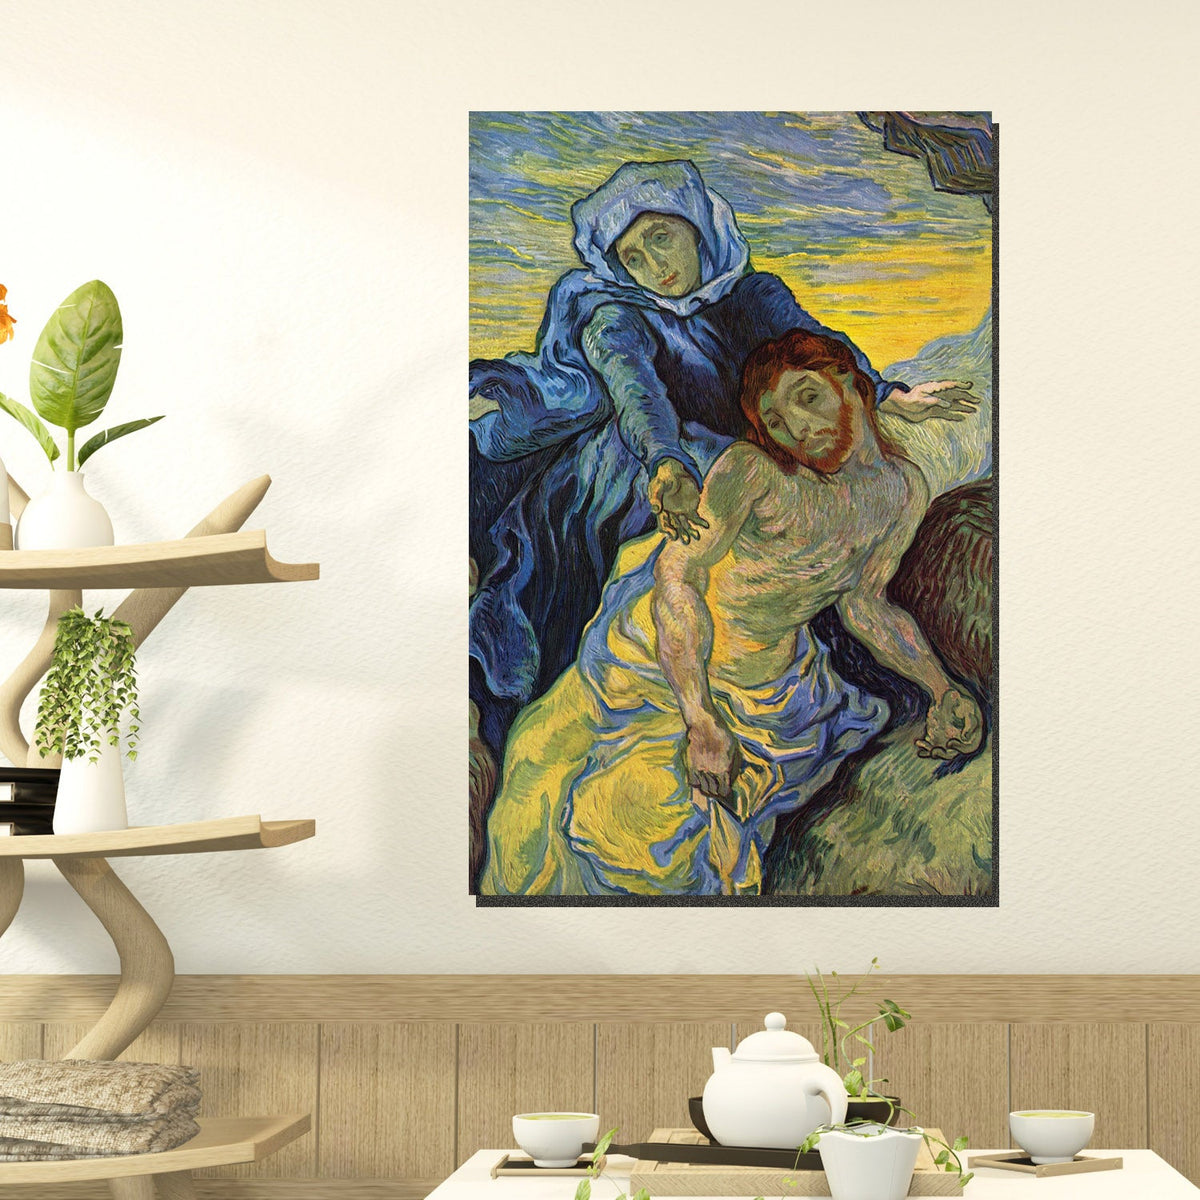 https://cdn.shopify.com/s/files/1/0387/9986/8044/products/ThePietabyVanGoghCanvasArtPrintStretched-2.jpg